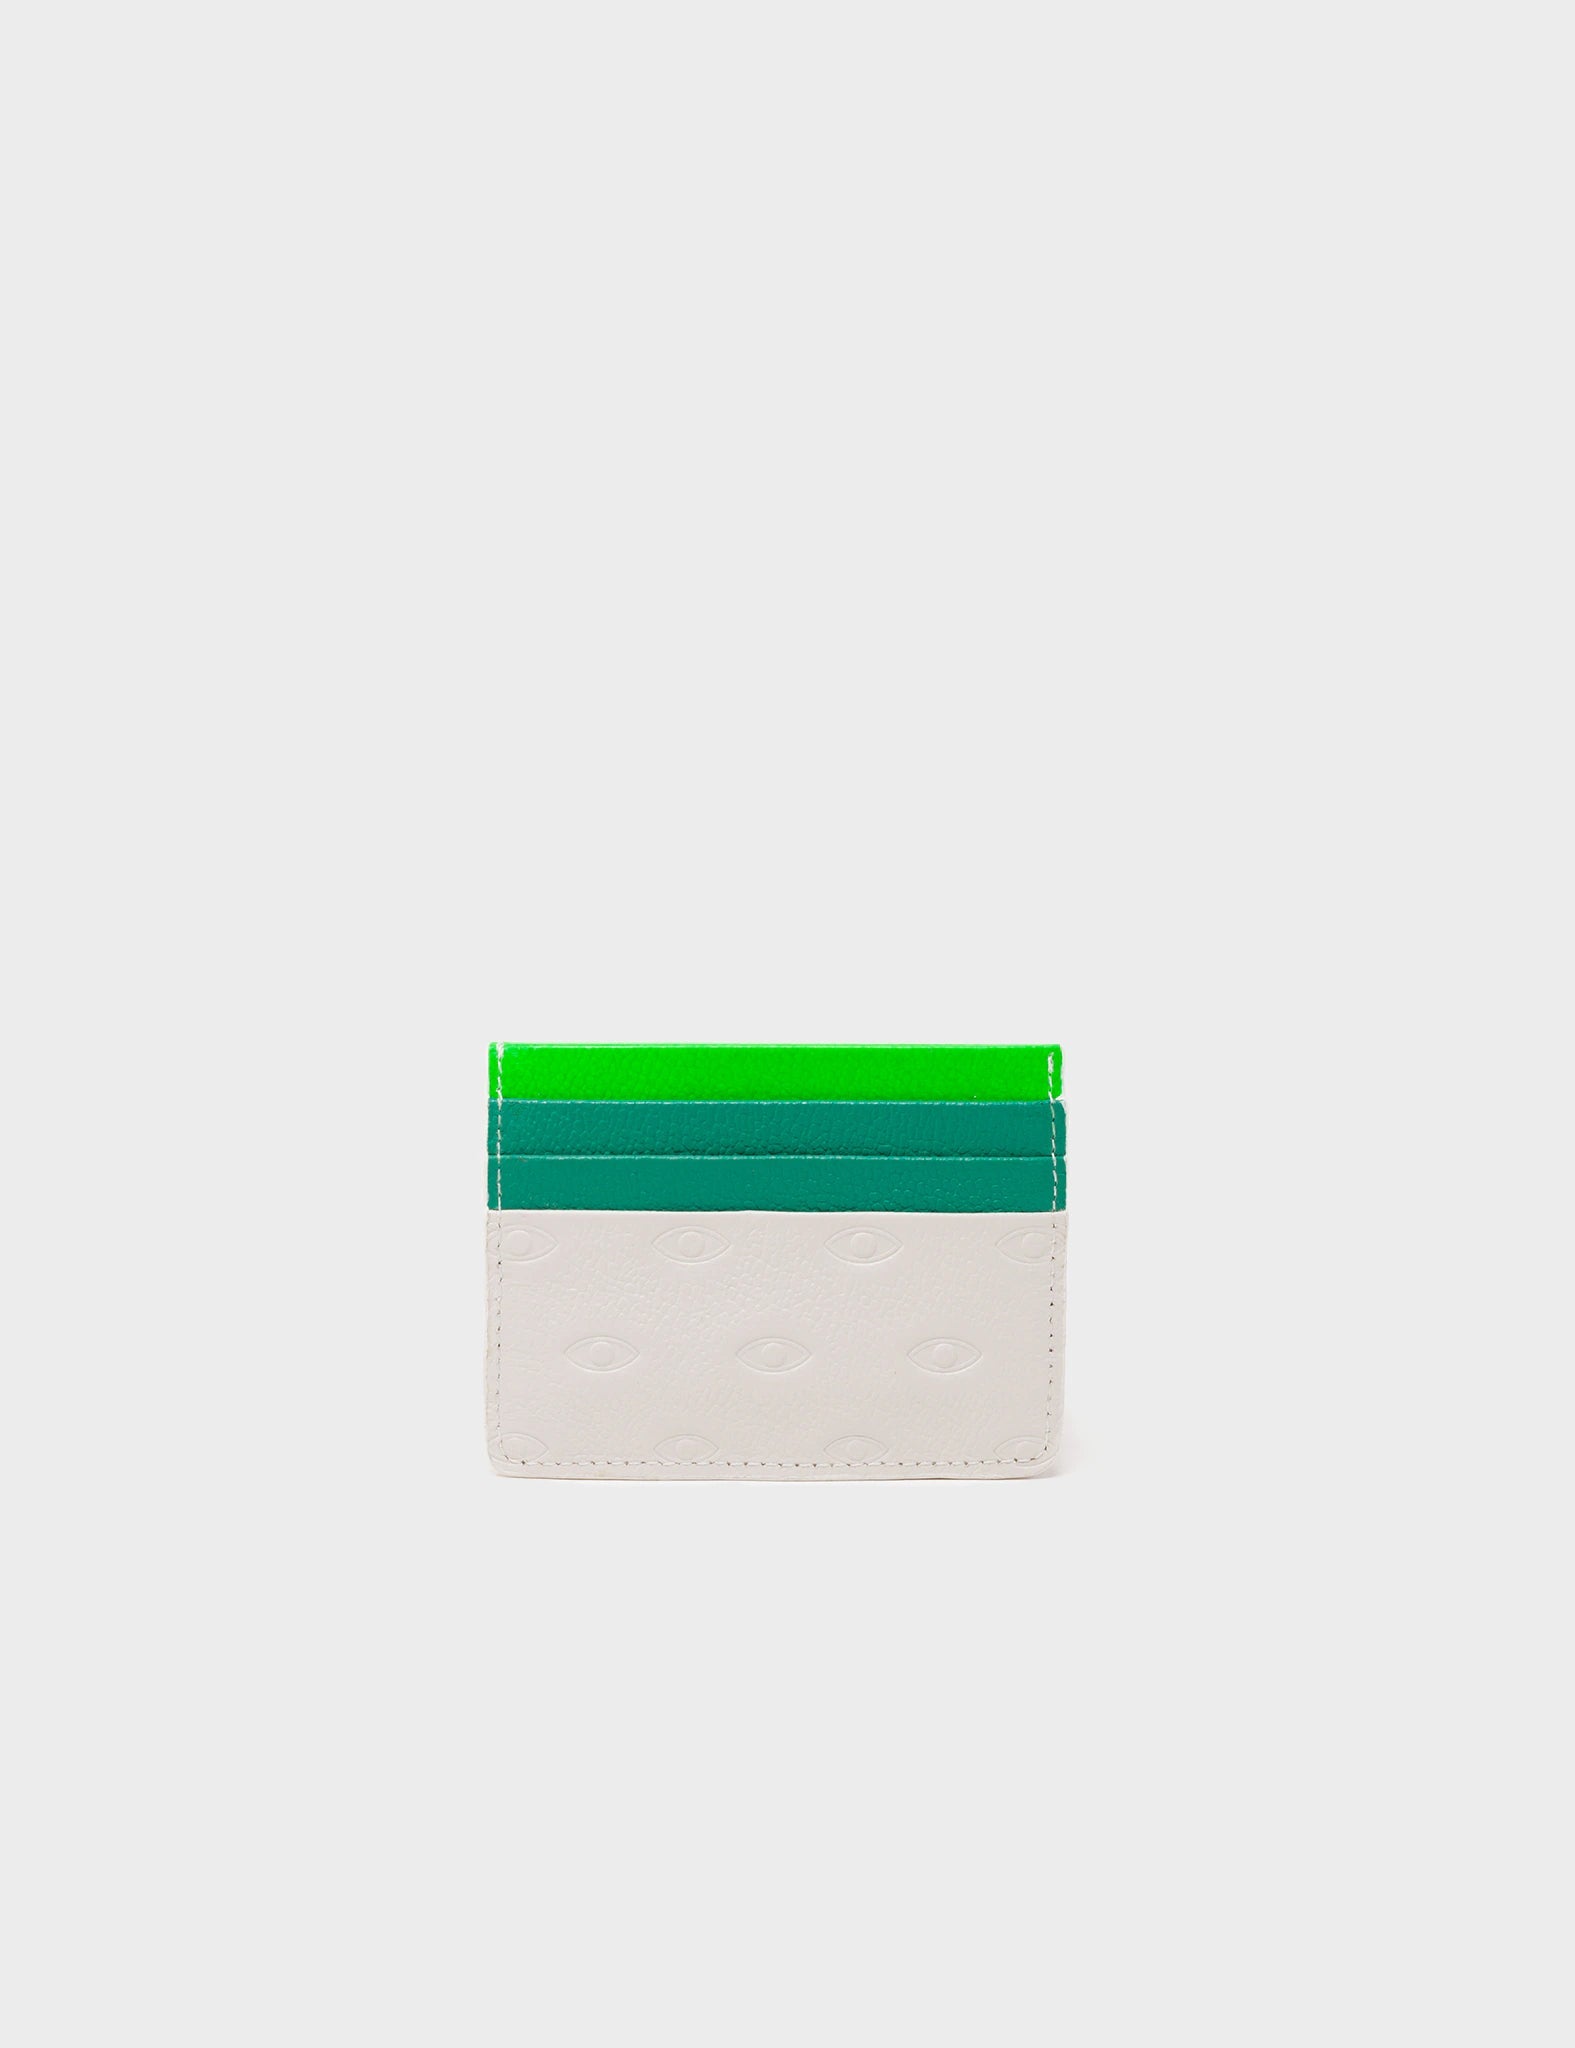 Cream and Green Leather Cardholder Eyes Pattern Debossed - Back